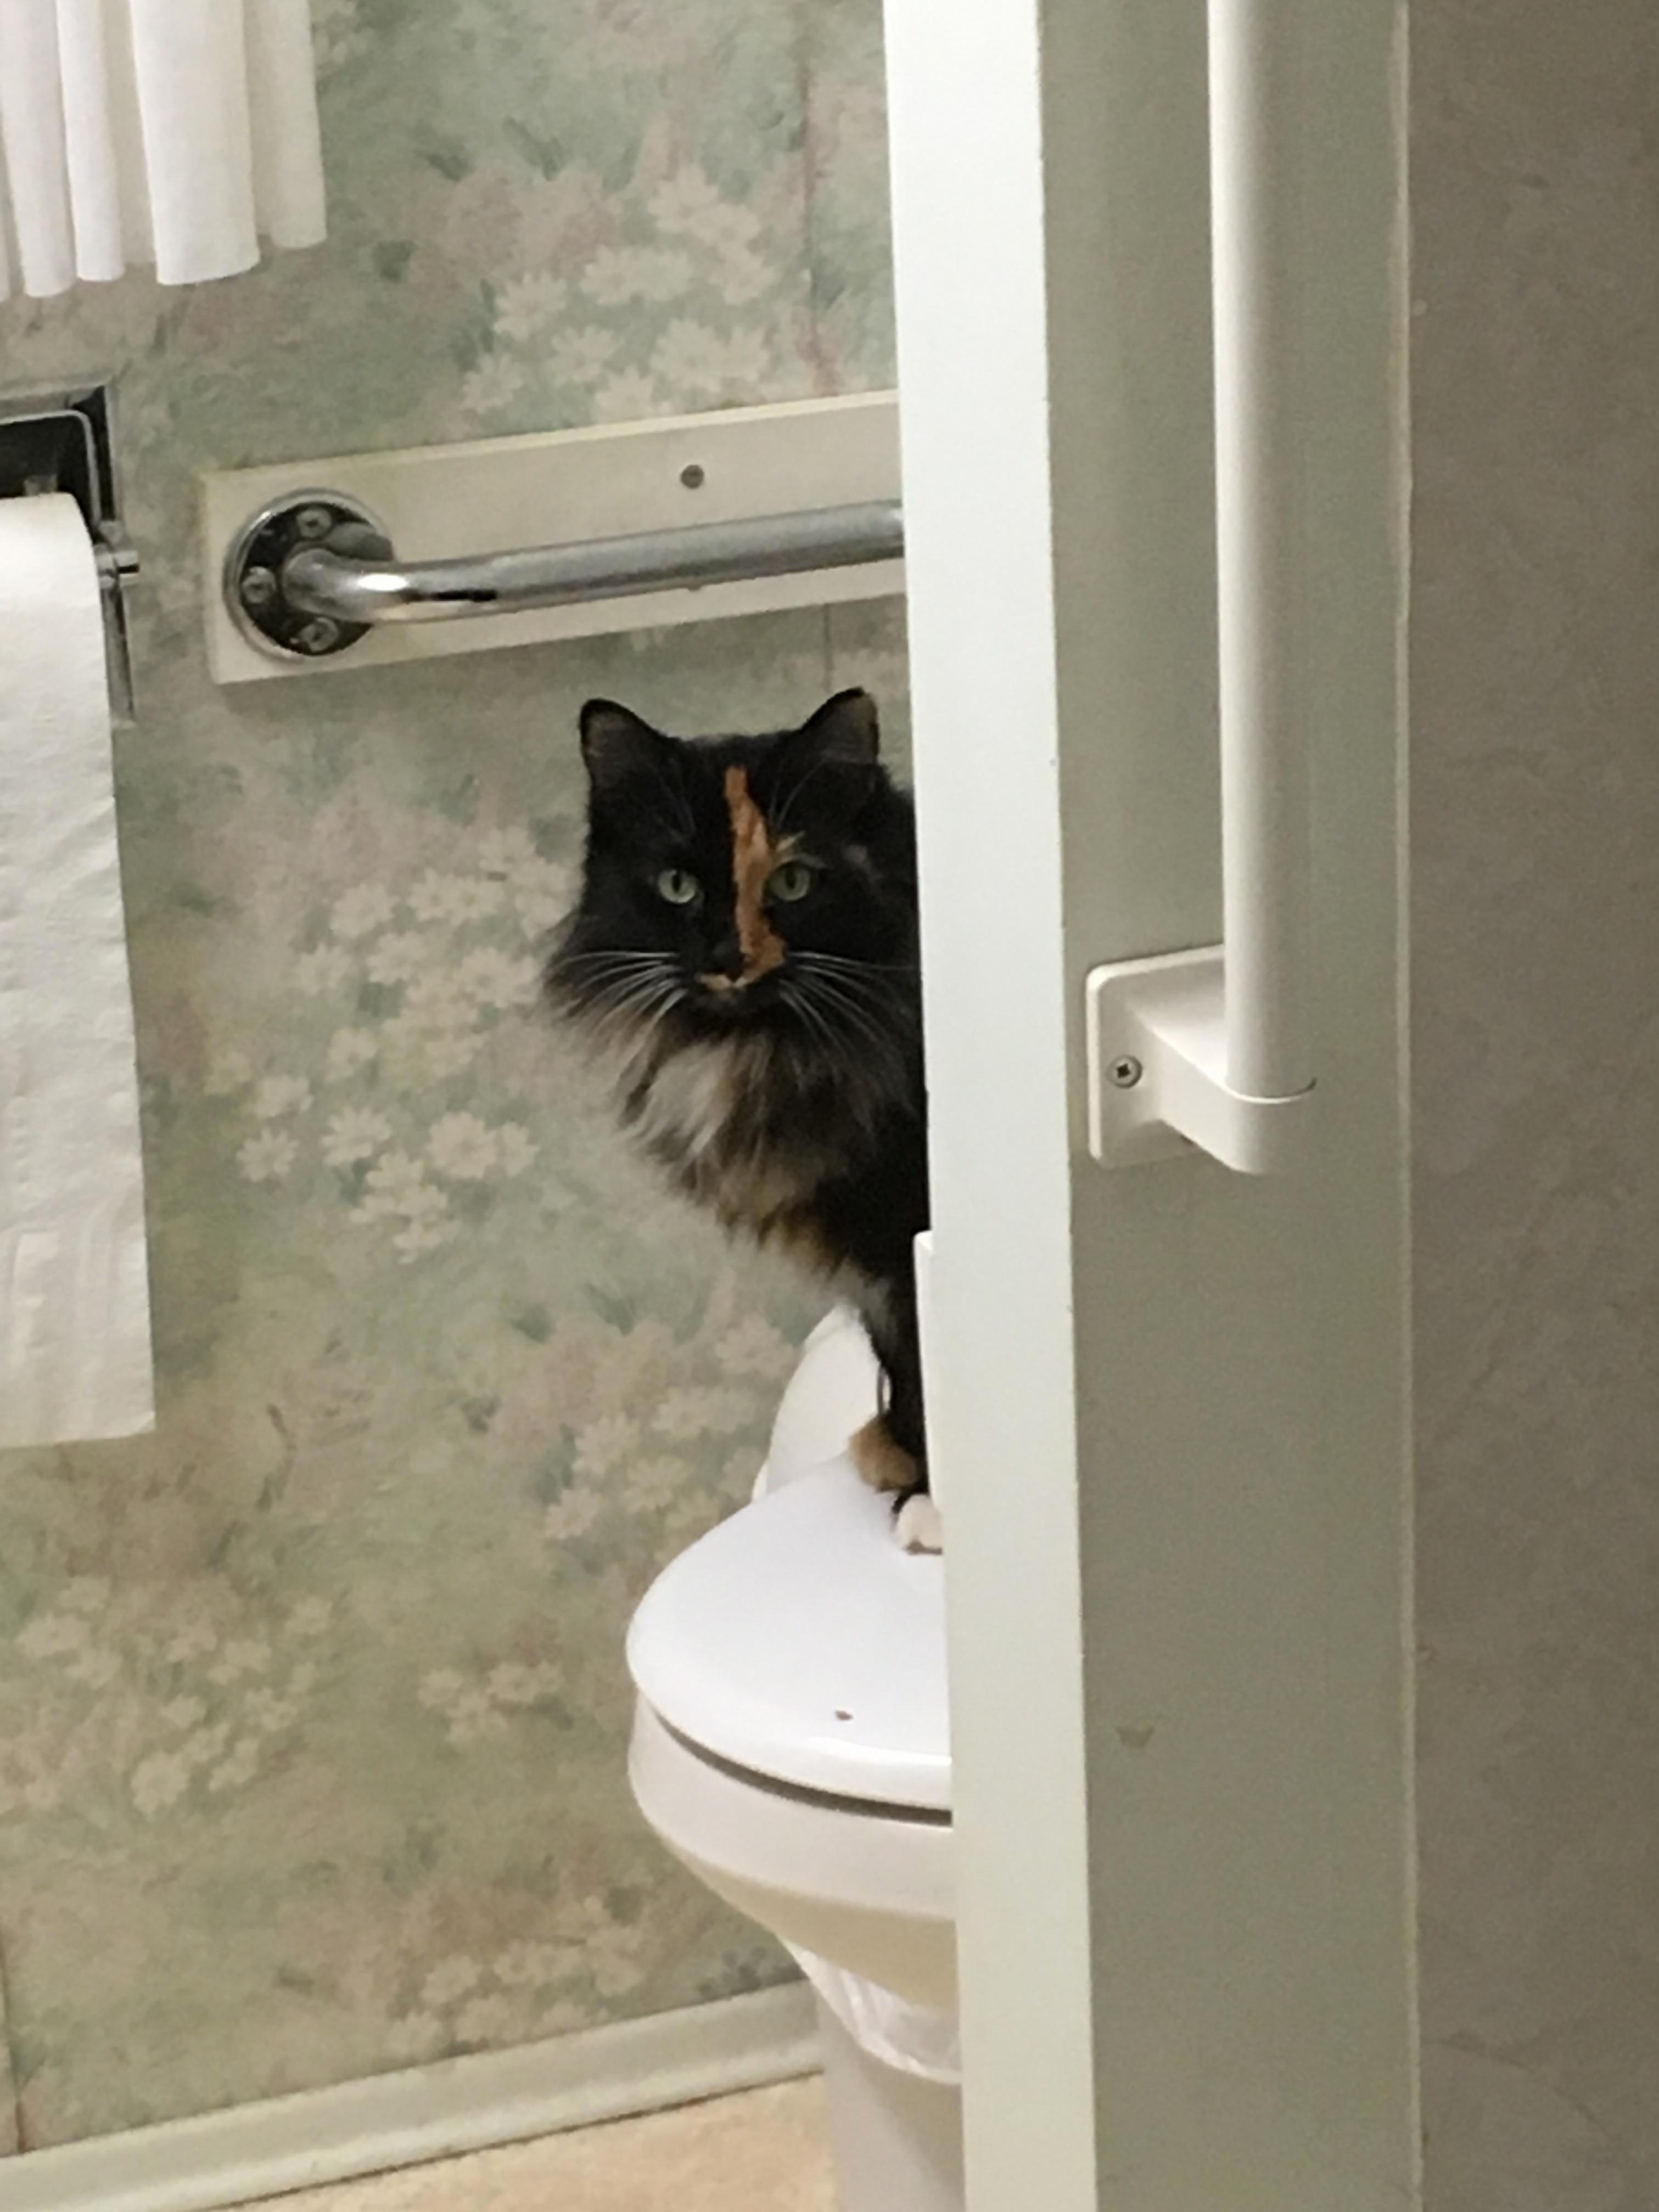 A little privacy please